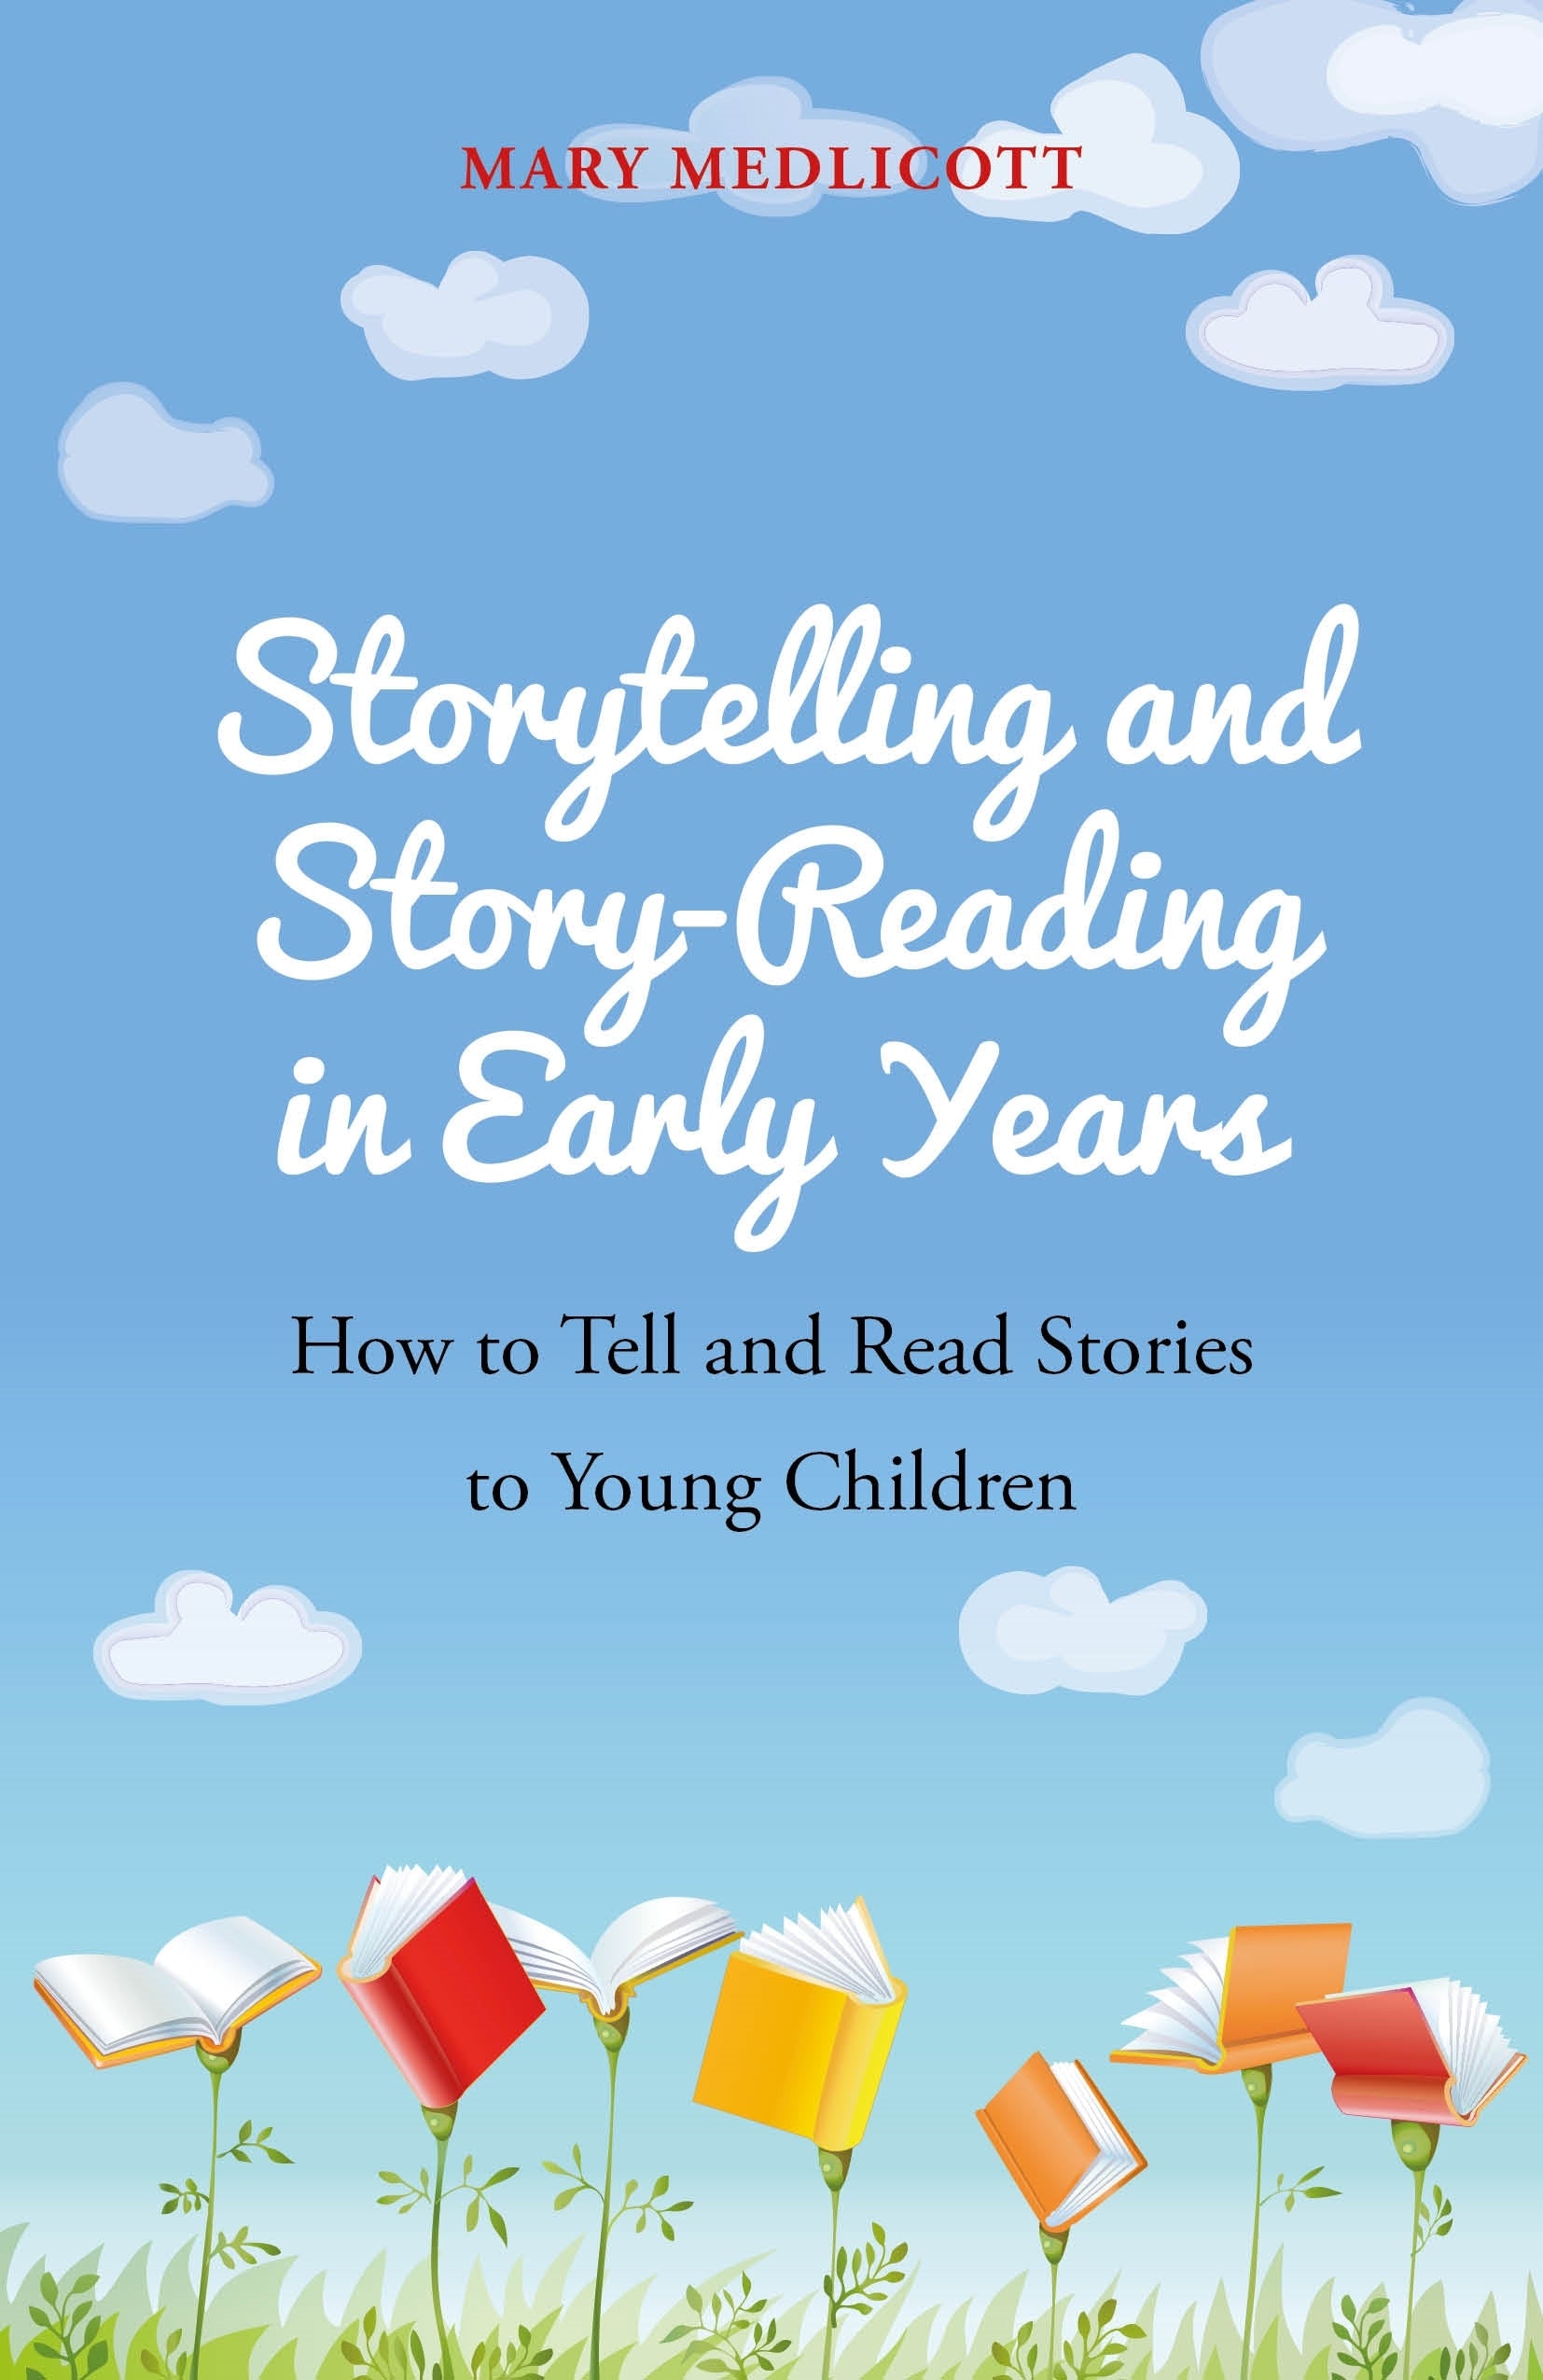 Storytelling and Story-Reading in Early Years by Mary Medlicott